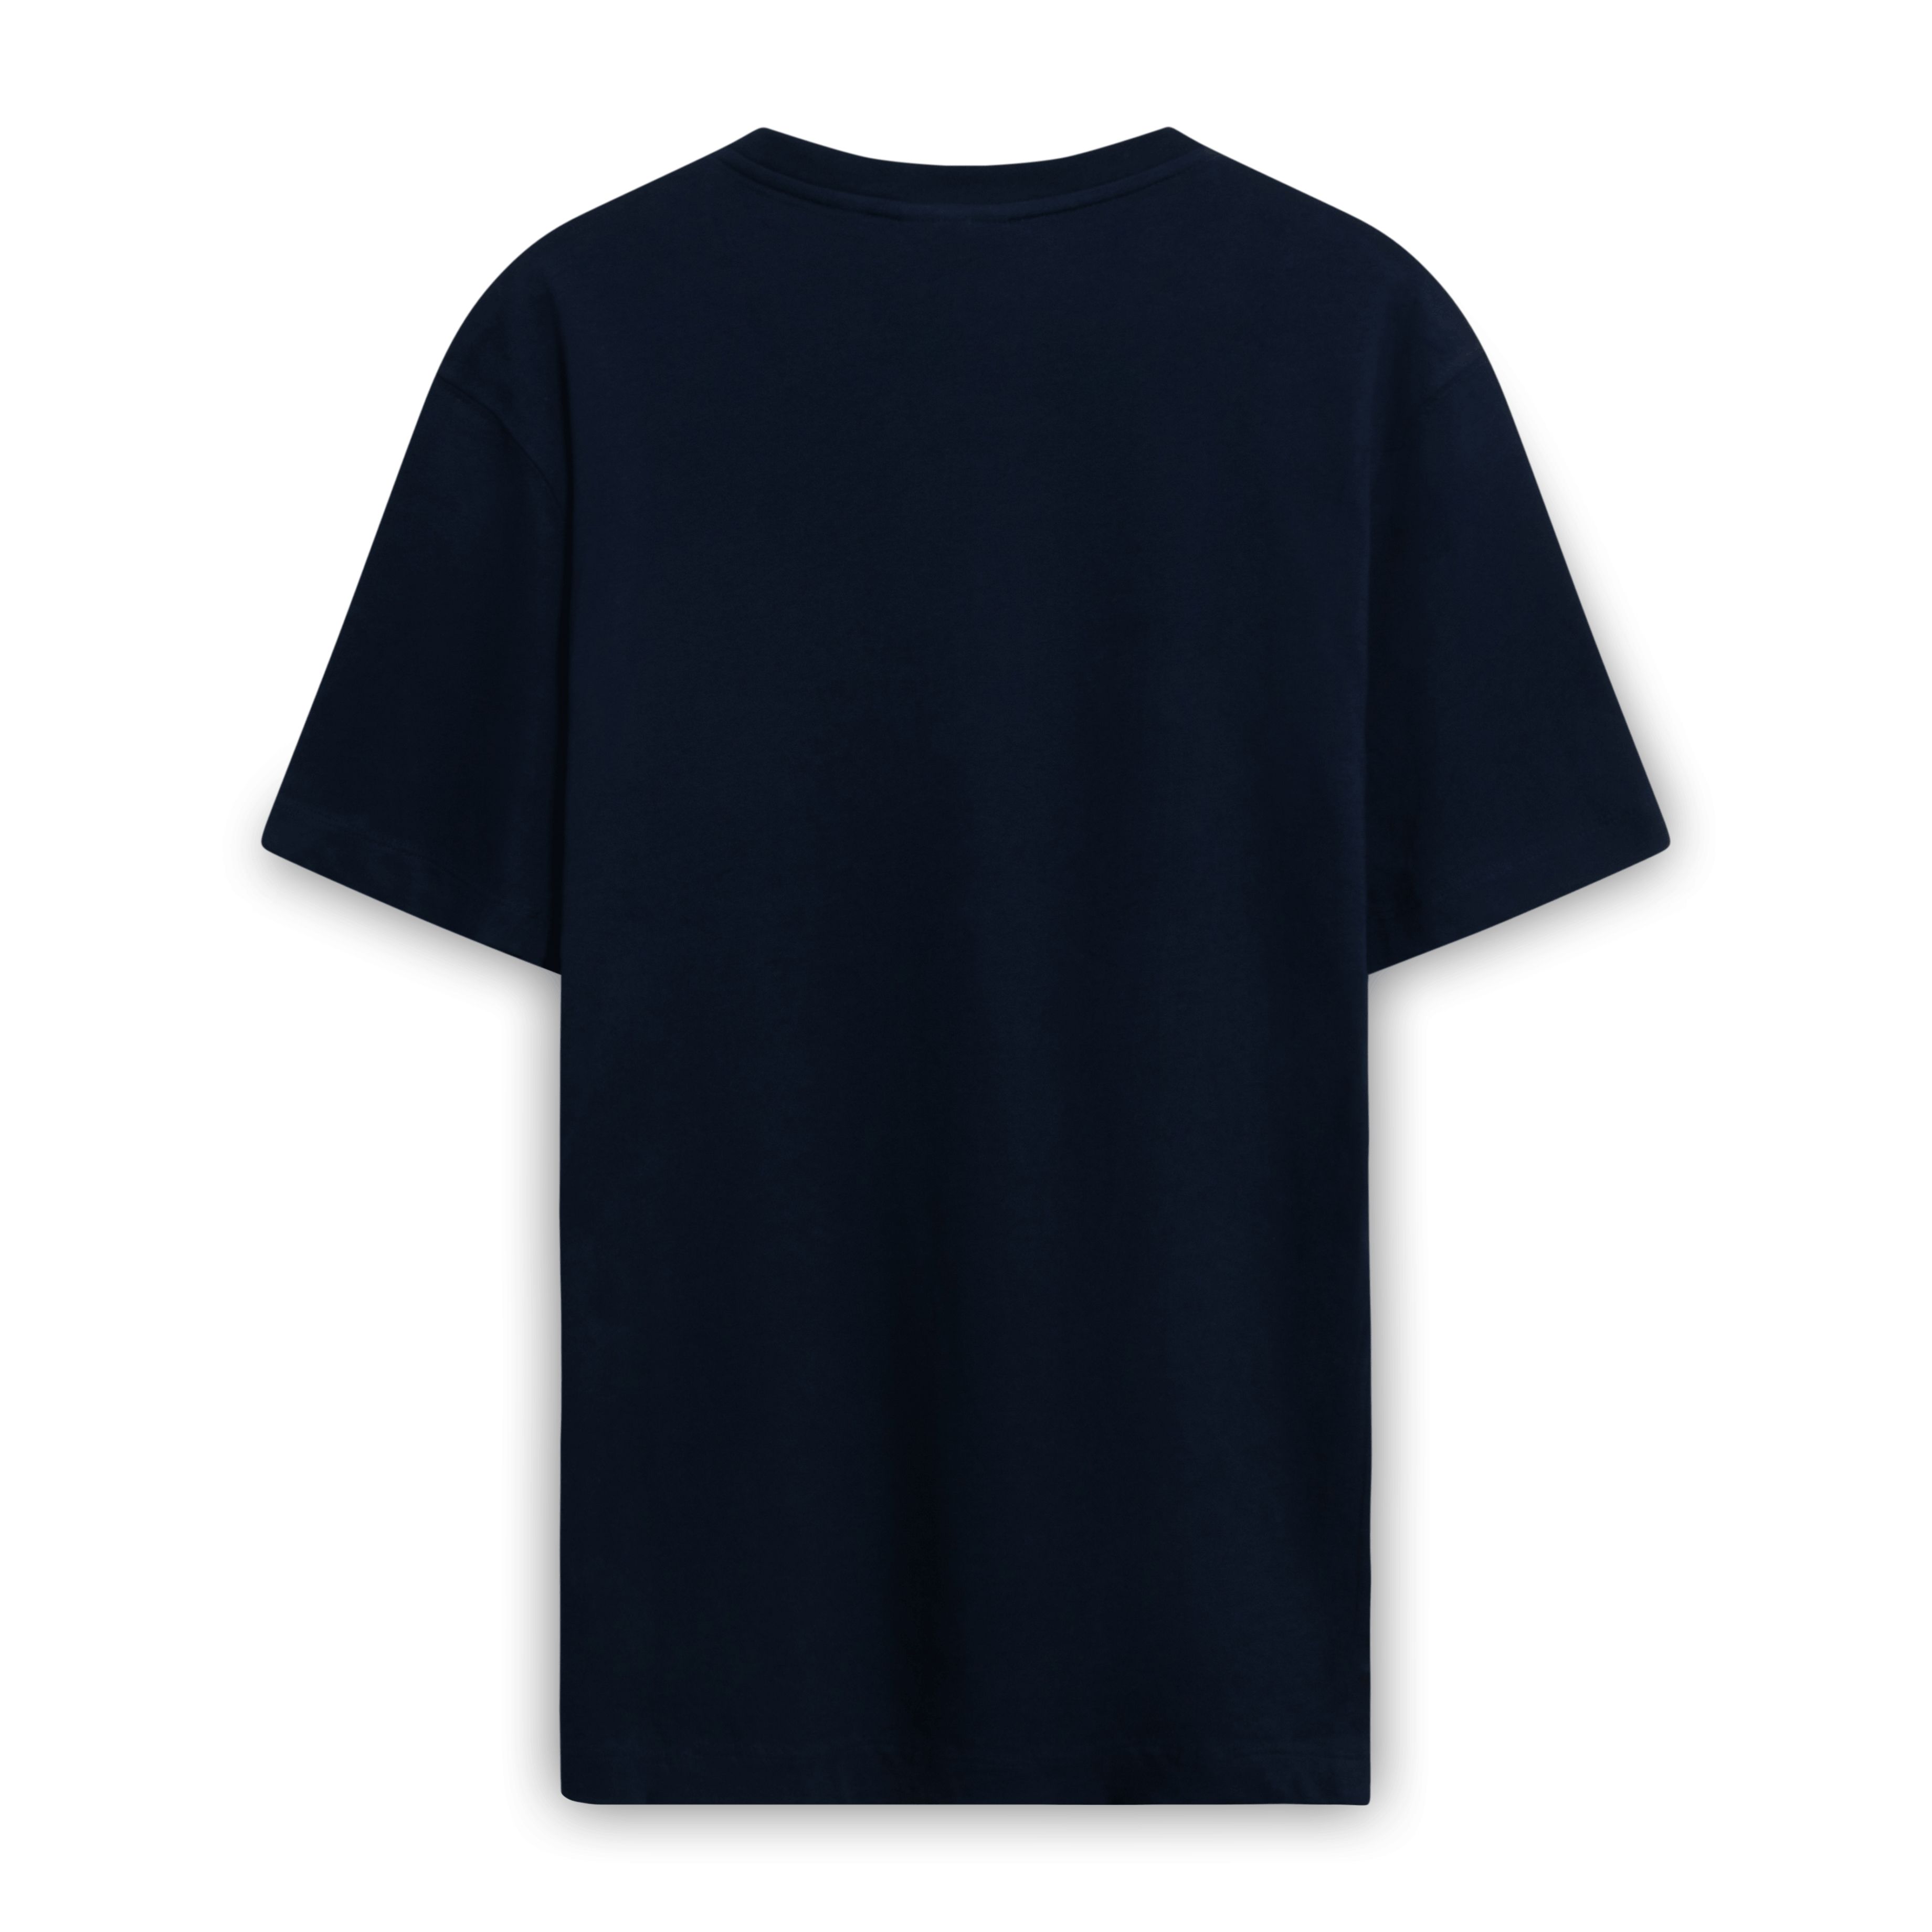 NUWO Security T-Shirt by NUWO | Basic.Space